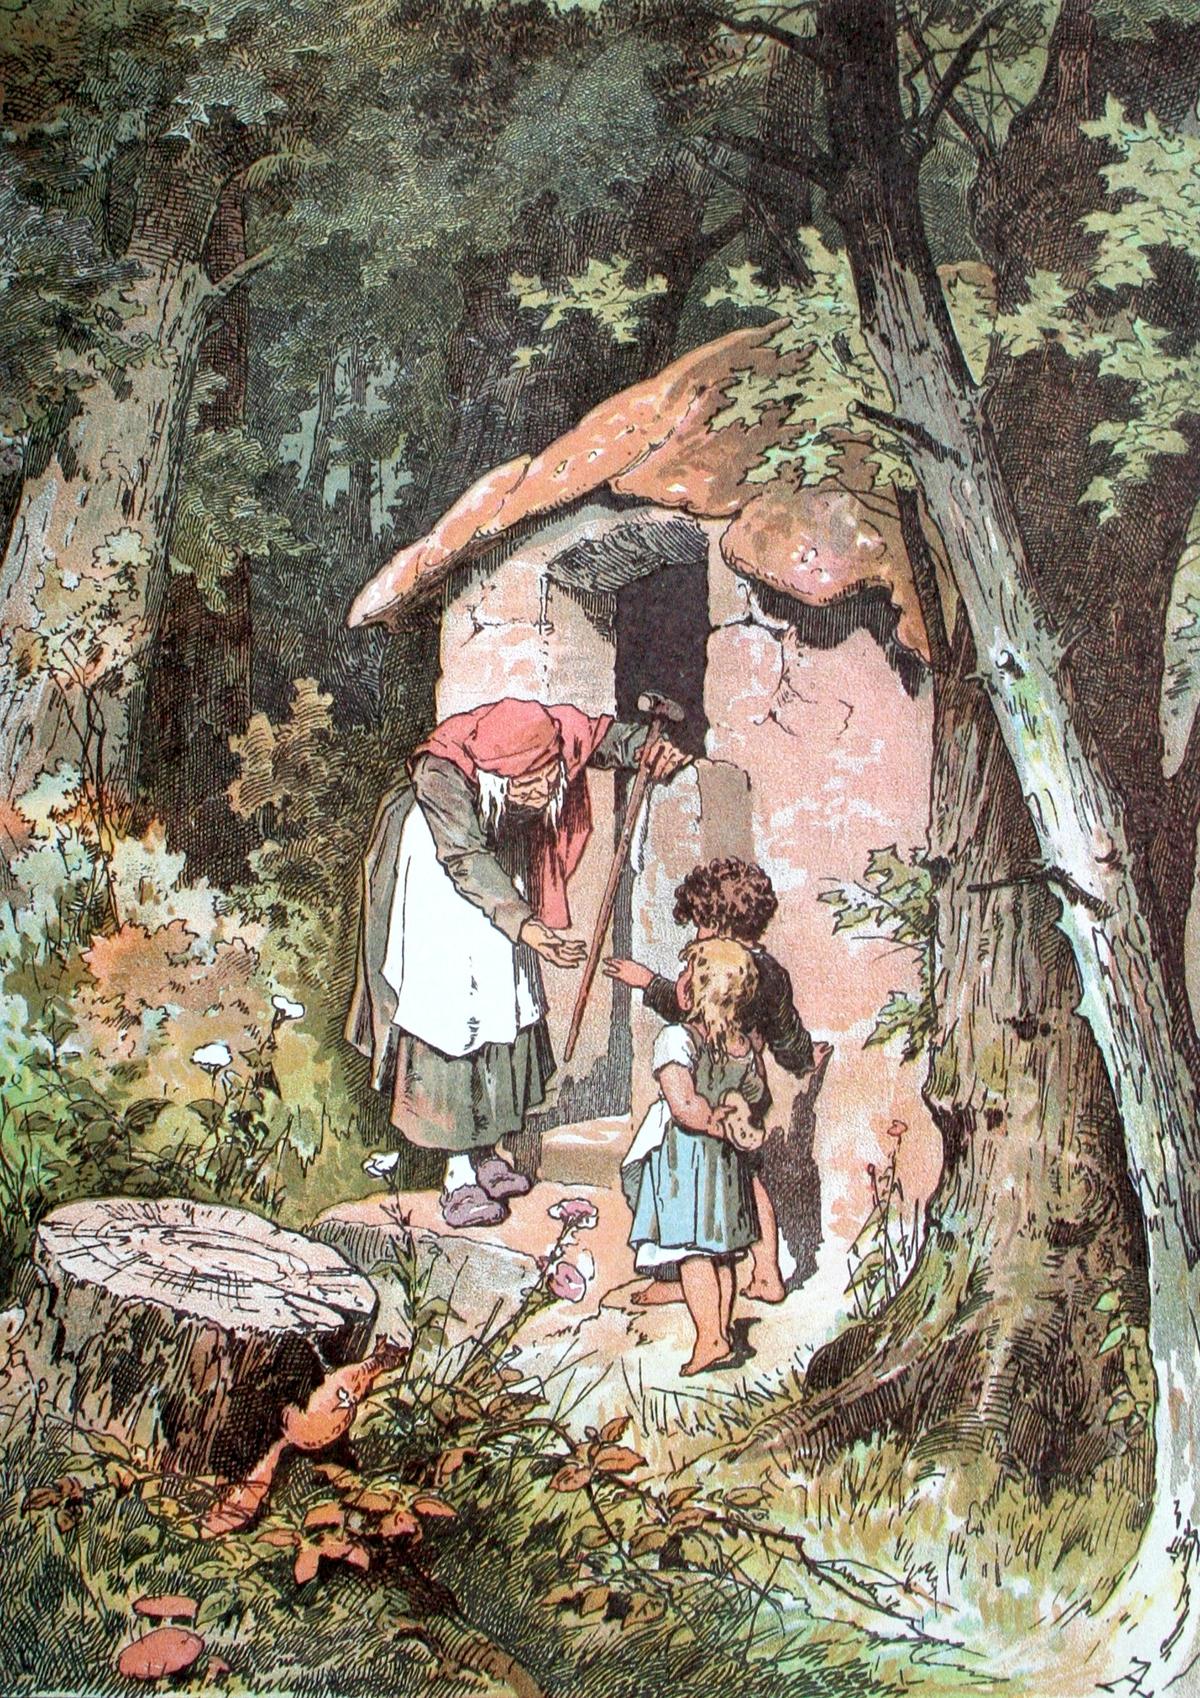 "Hänsel and Gretel," unknown date, by Alexander Zick. (Public domain)